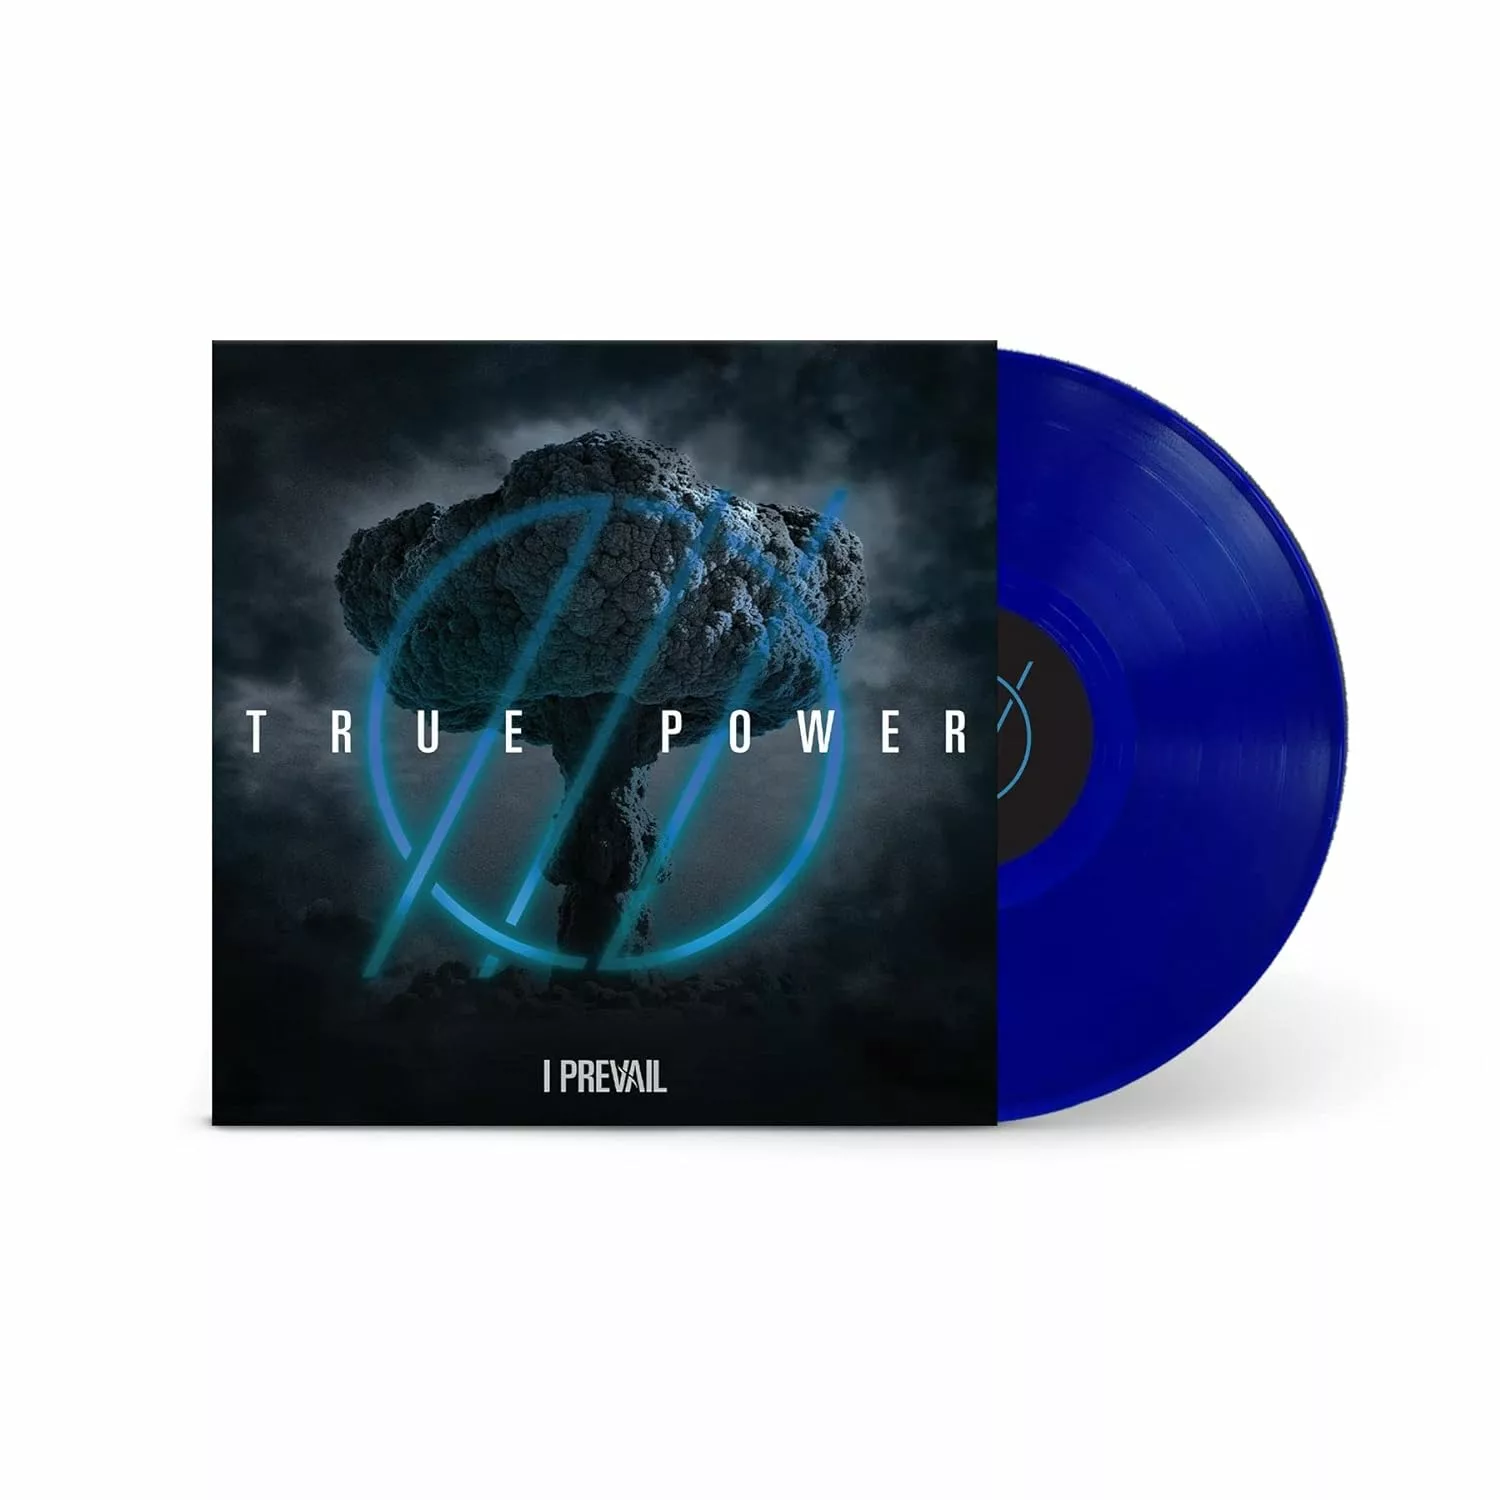 I PREVAIL - True Power (Limited Edition) [AGAINST THE WIND LP]